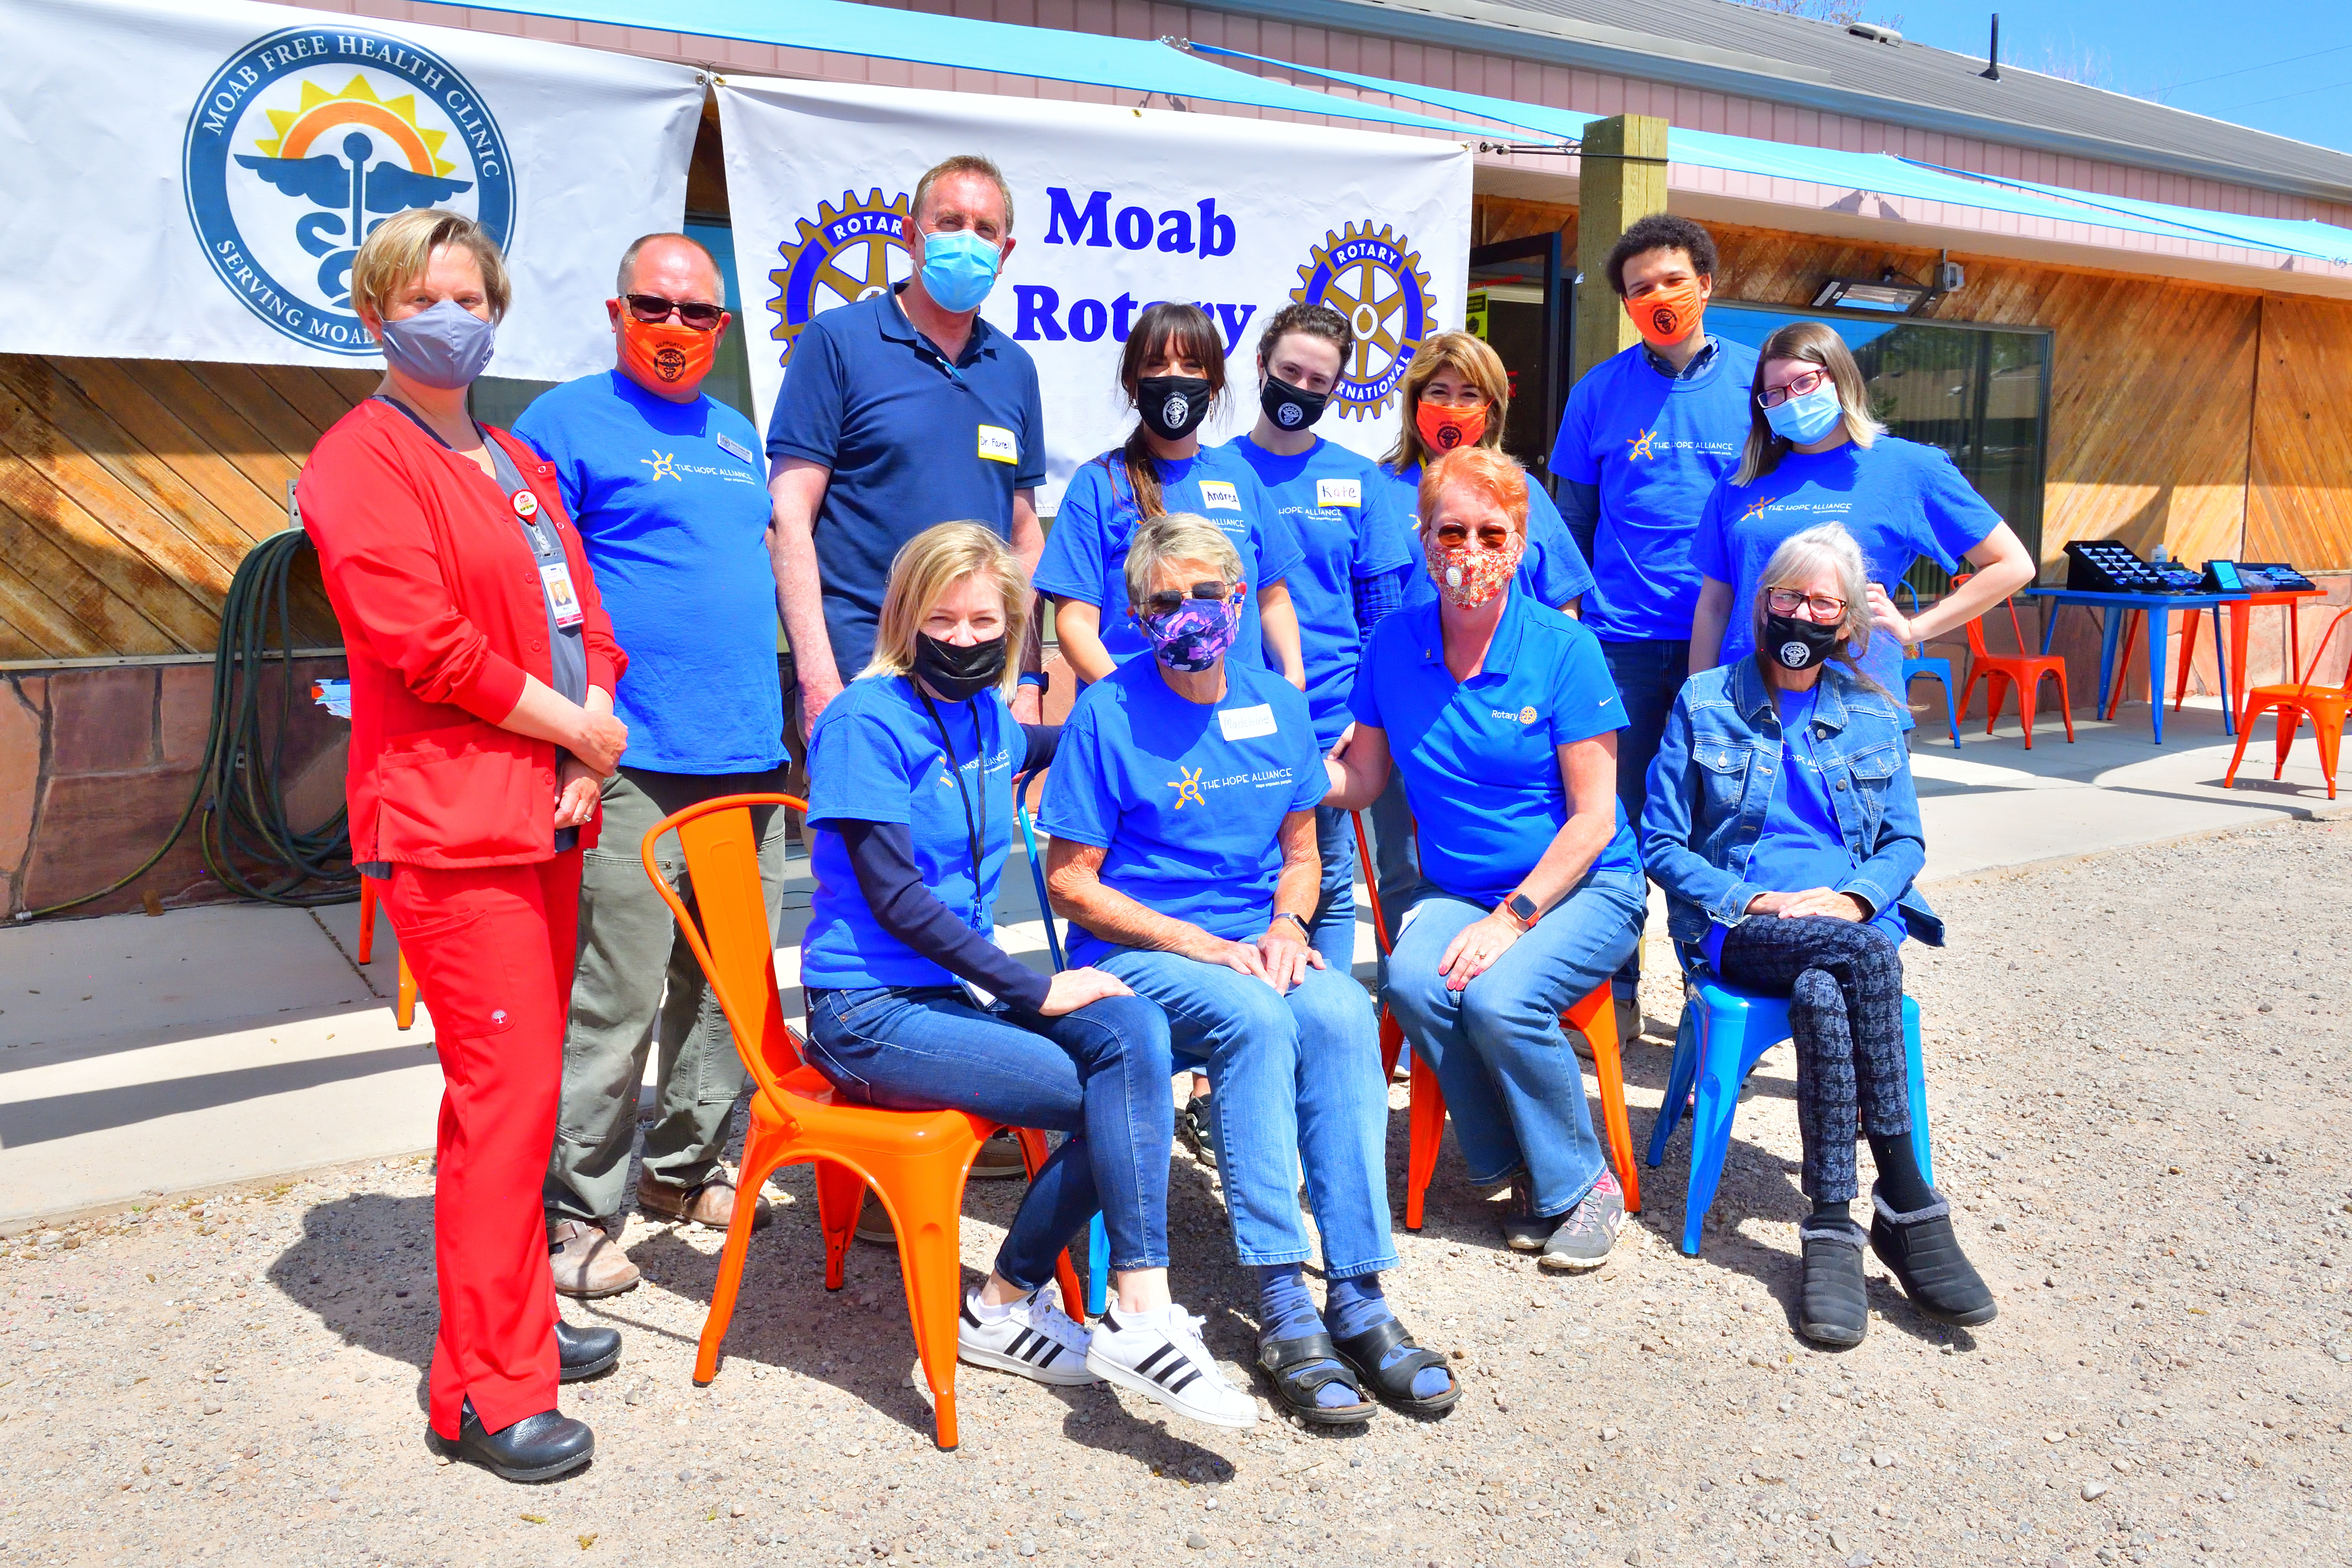 members of the Rotary Club of Moab pose with employees of the Moab Free Health Clinic